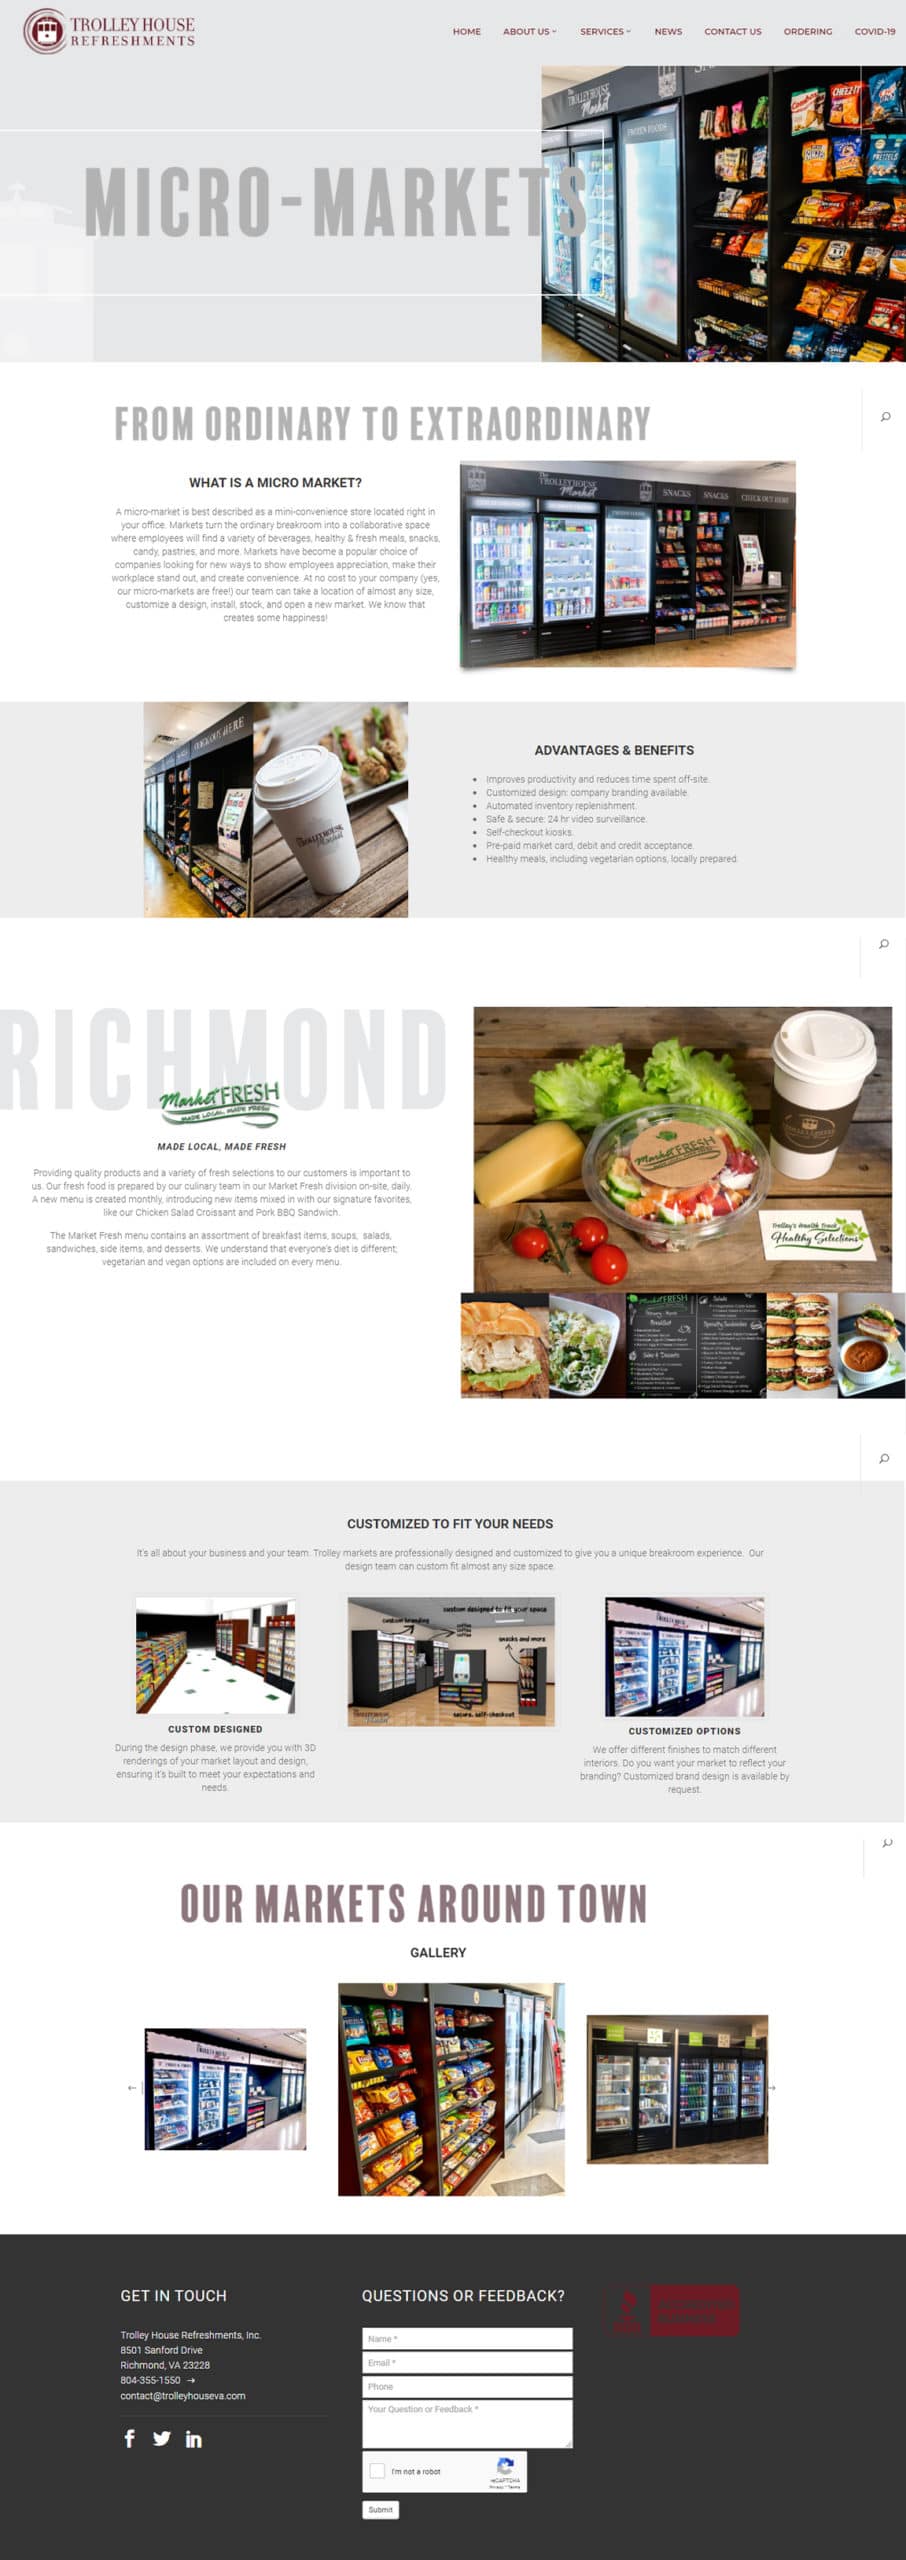 Trolley House website redesign micro market page